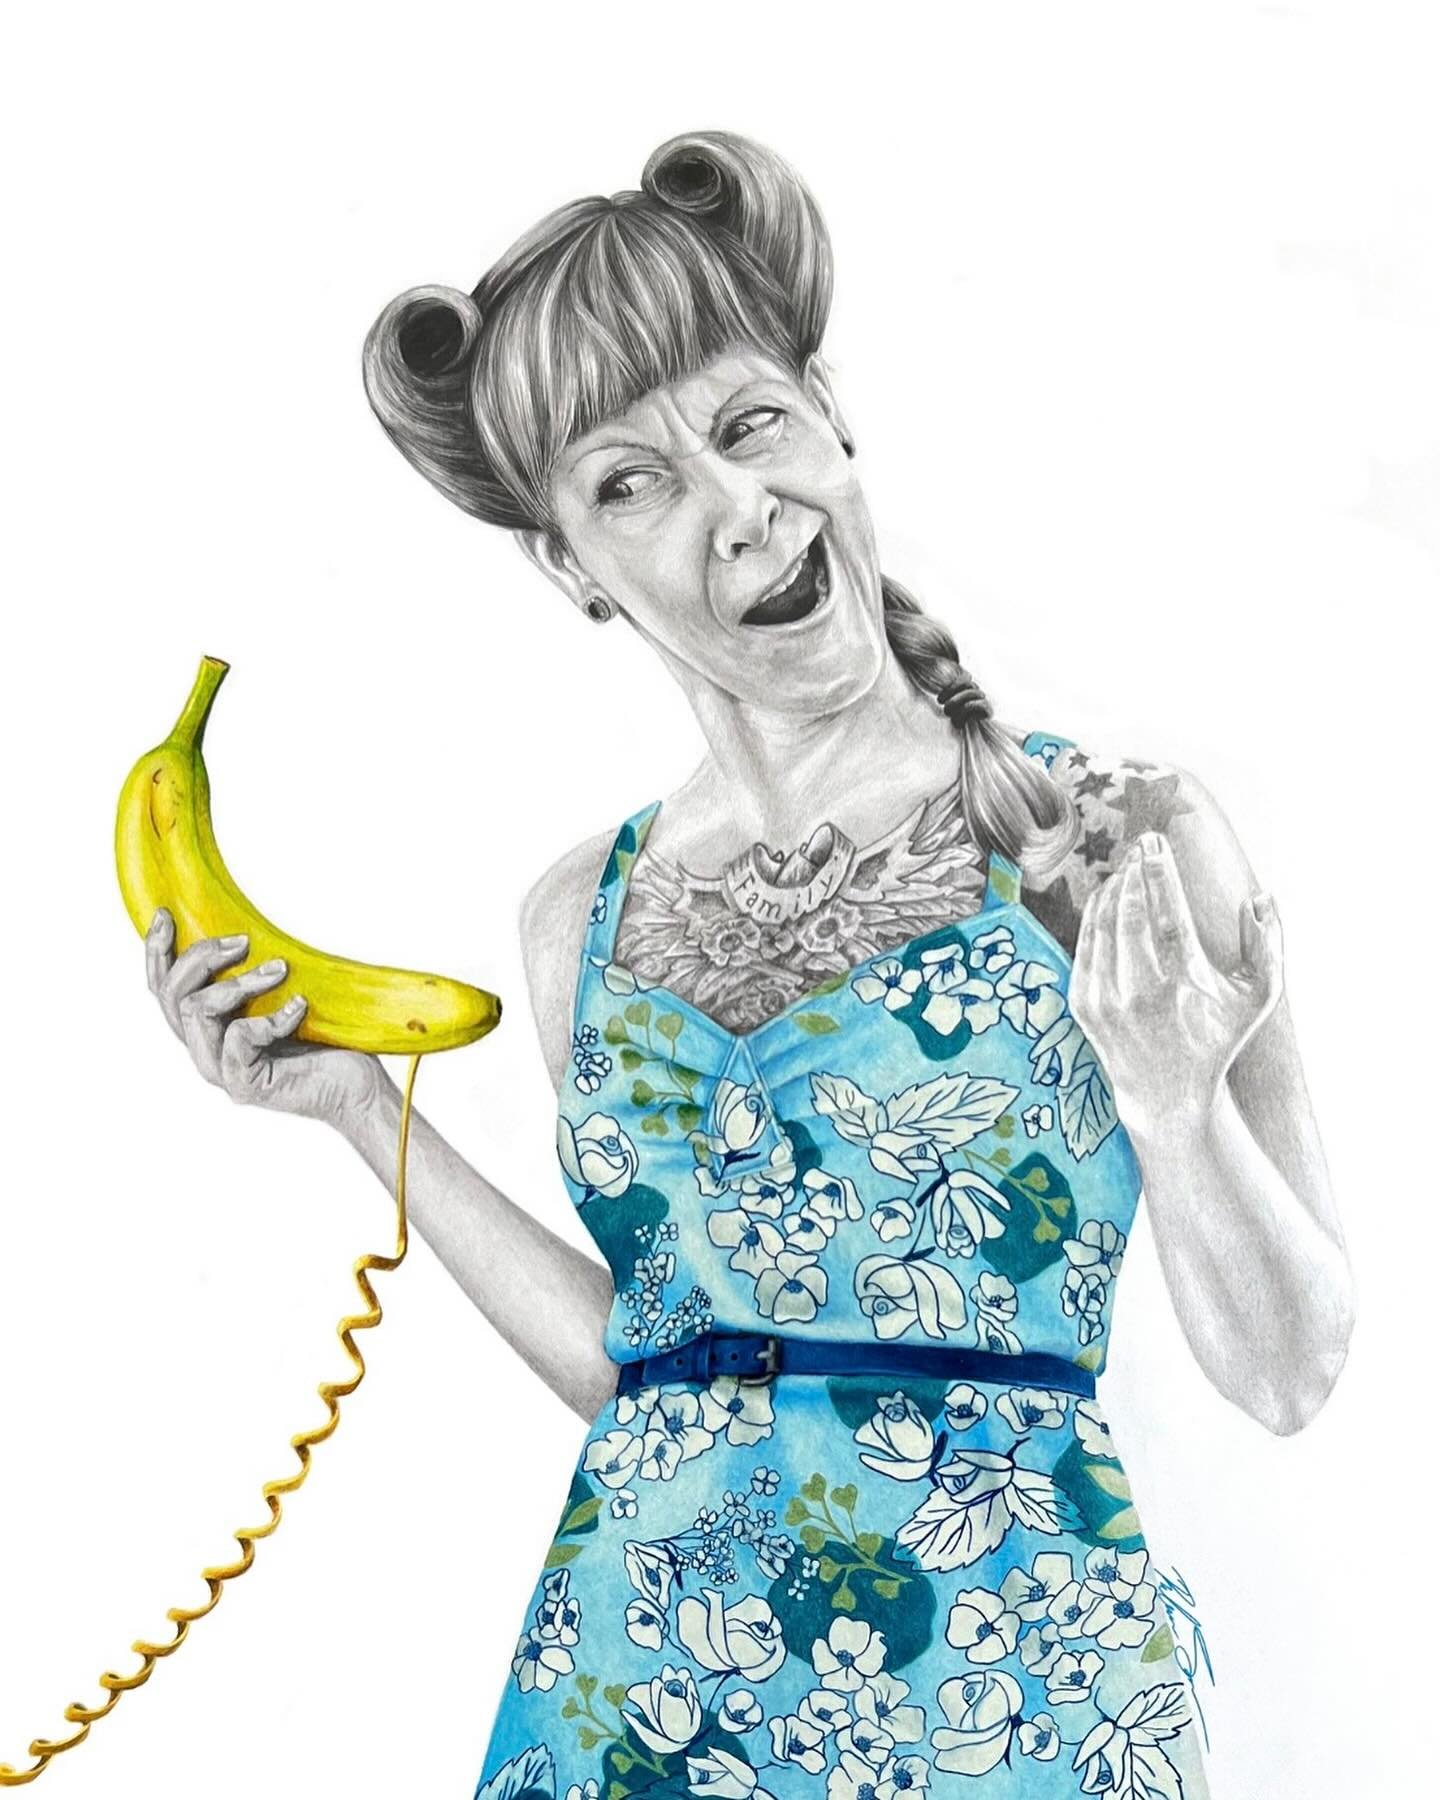 We can&rsquo;t get enough of all the wonderful works in the Women in Art | A Joyful Journey exhibition! Like these two lovely ladies by artist Rebecca J. Jones
&ldquo;Bananas&rdquo;, graphite and colored pencil, 30x24in. 
Feminism as it is today in r